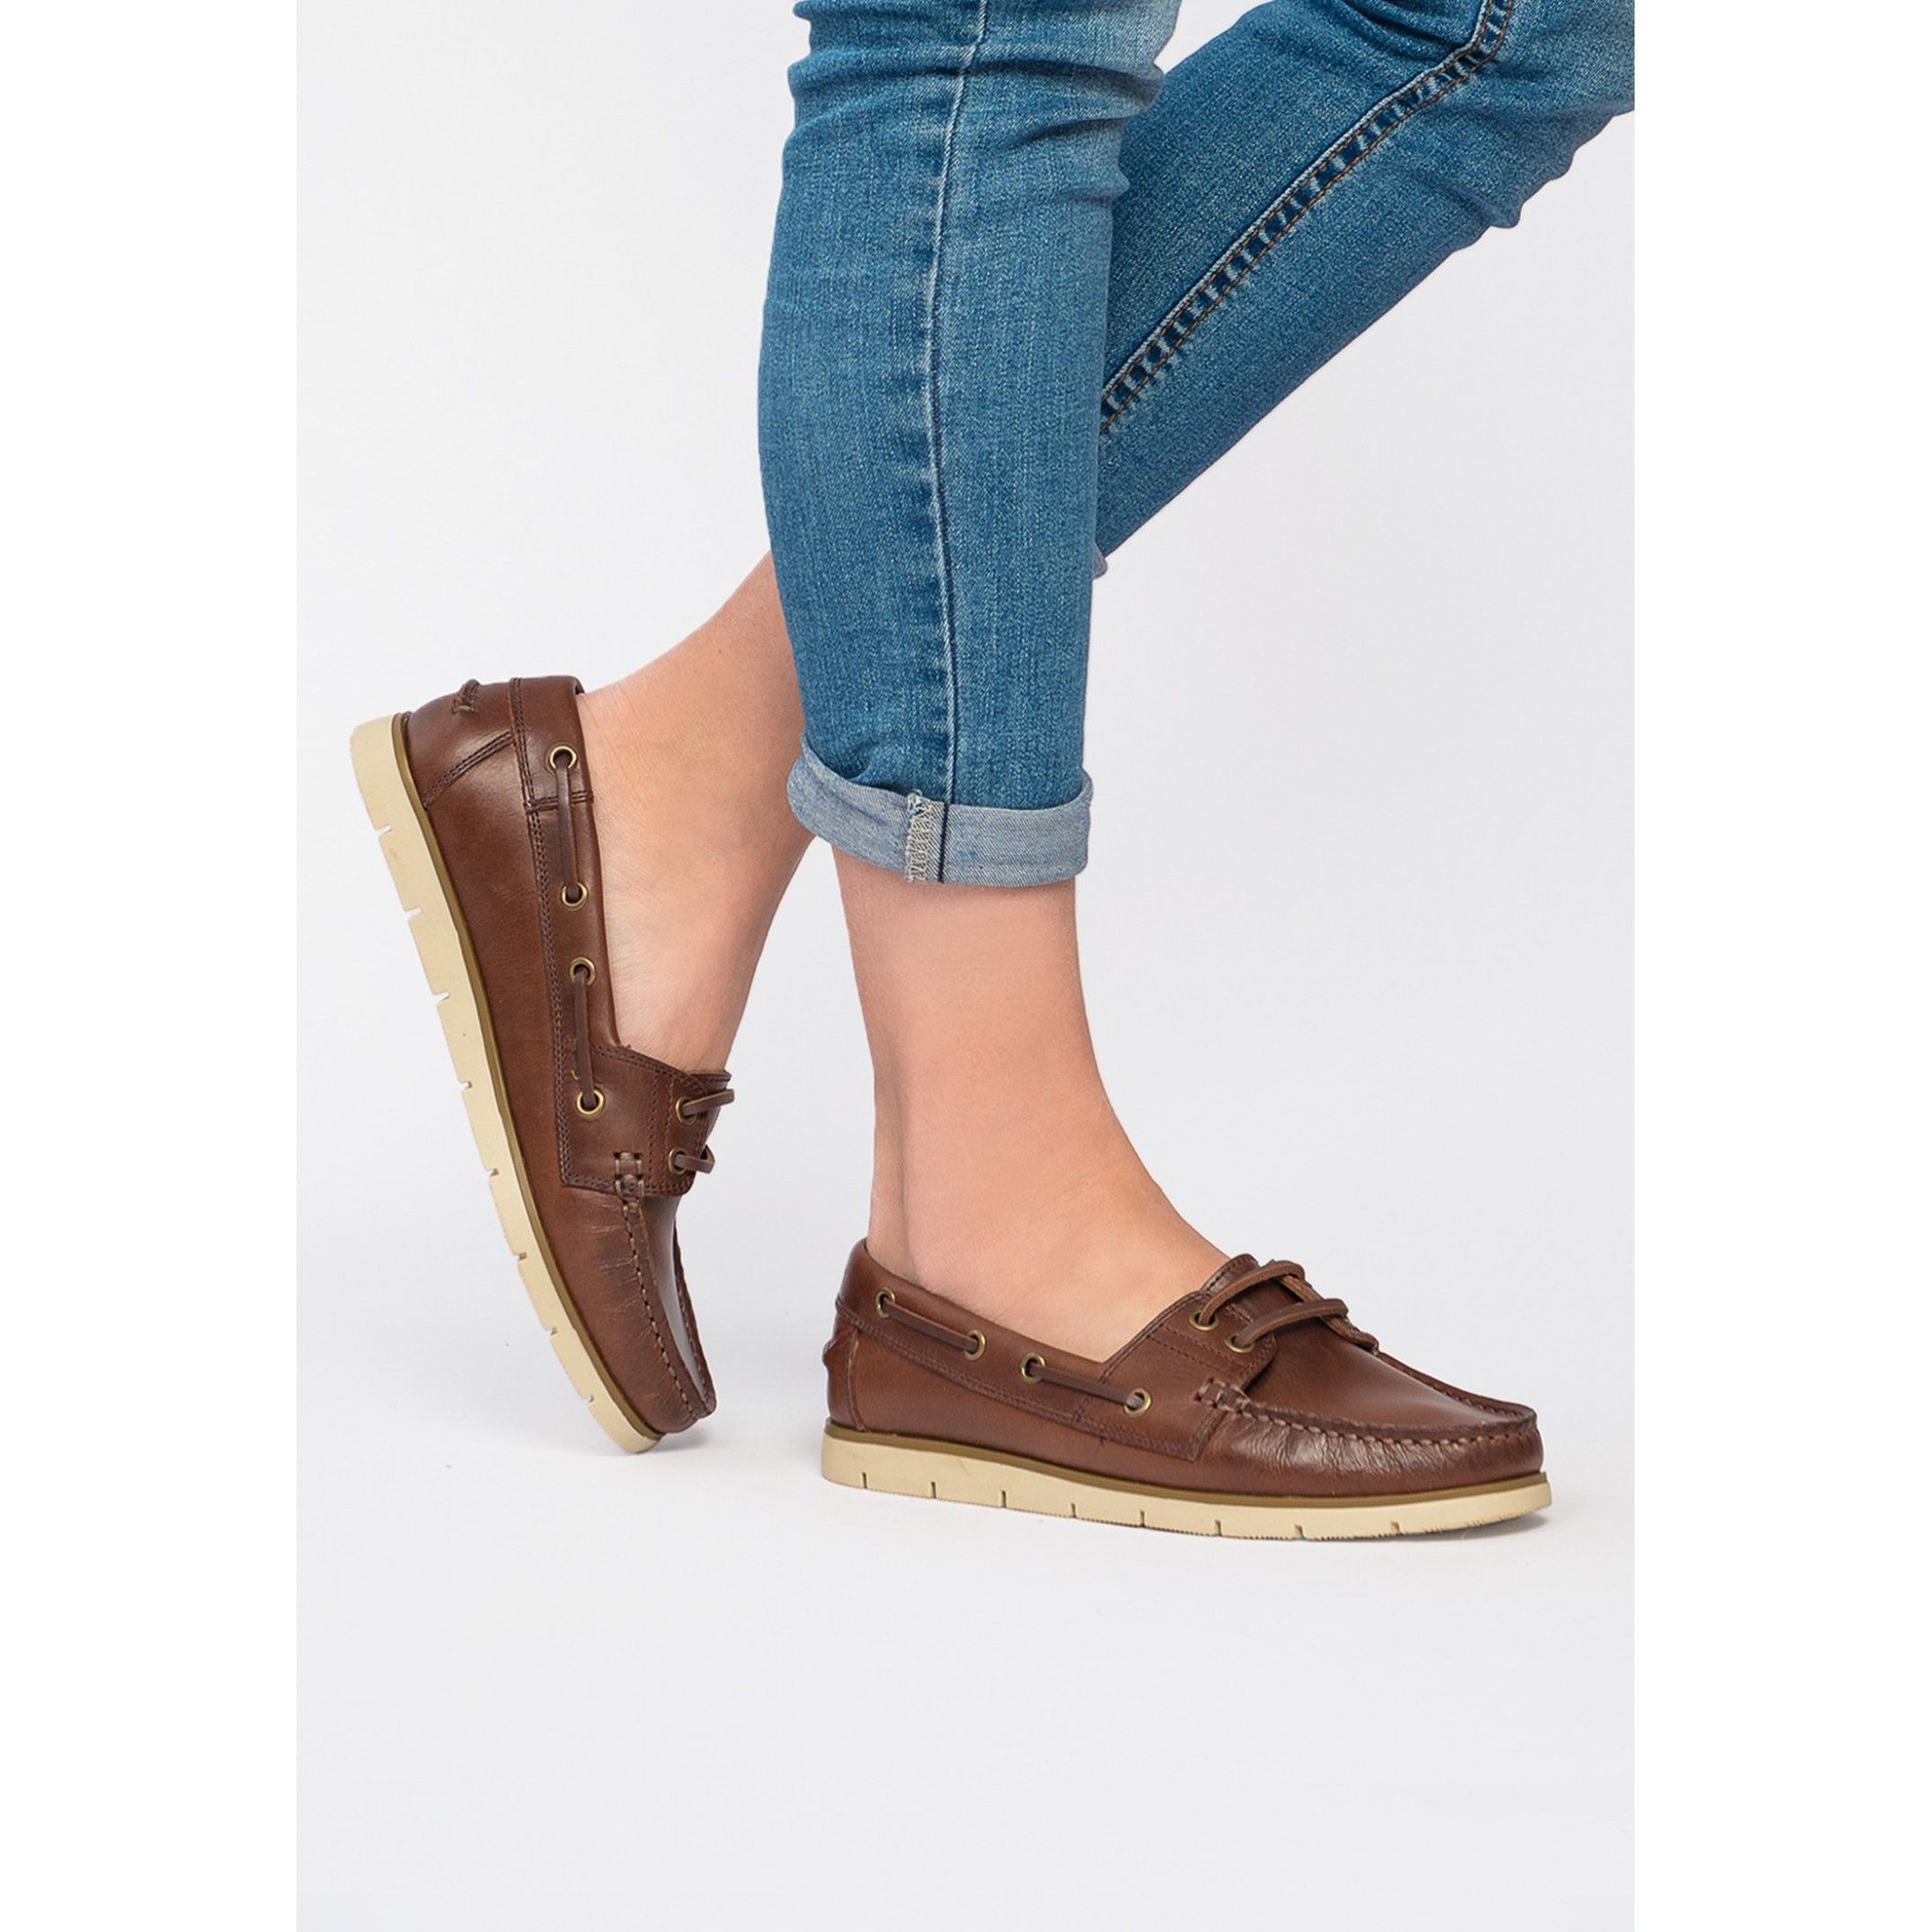 Leather boat shoes for women, by Son Castellanisimos. Upper made of cowhide leather. Leather laces closure. Forro interior y plantilla: 100% piel vacuno. Sole material: synthetic and non slip. Heel height: 1,5 cm. Designed and made in Spain.